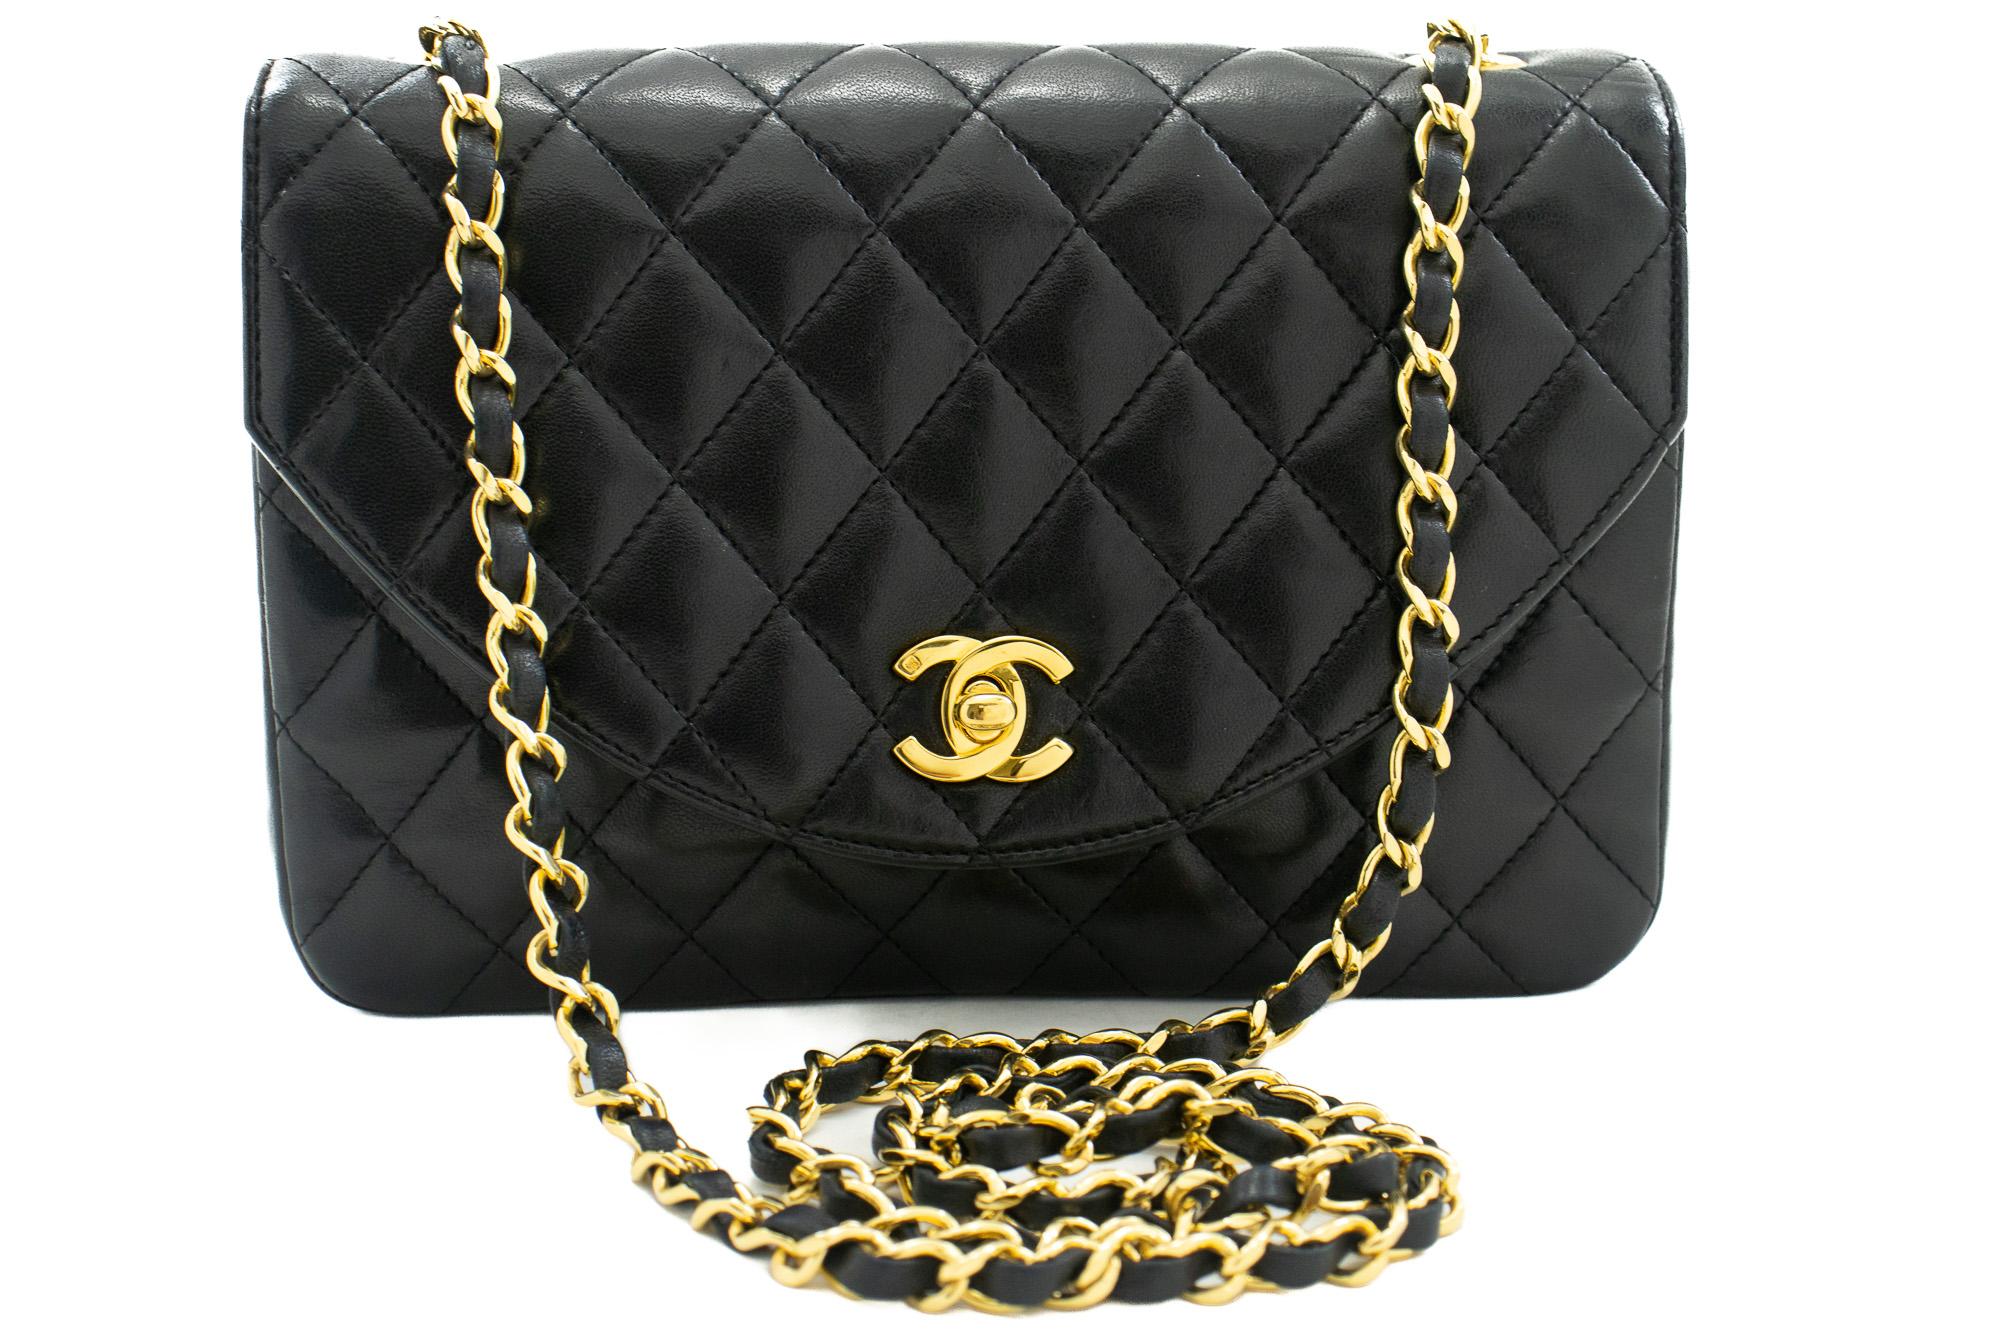 An authentic CHANEL Half Moon Chain Shoulder Bag Crossbody Black Quilted Flap. The color is Black. The outside material is Leather. The pattern is Solid. This item is Vintage / Classic. The year of manufacture would be 1989-1991.
Conditions &